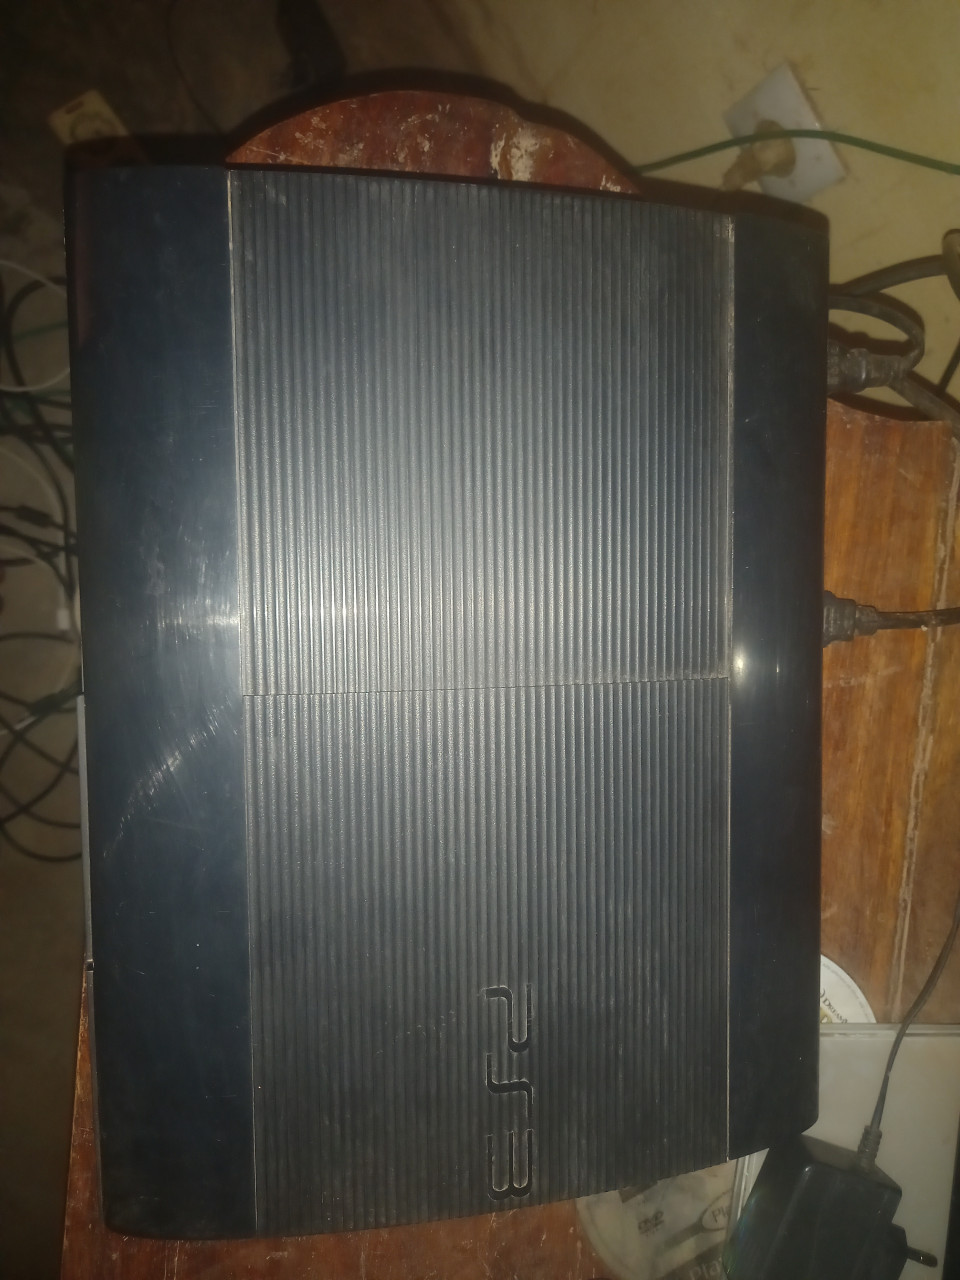 Sony PlayStation 3, Video Games - Consolas, Bissau